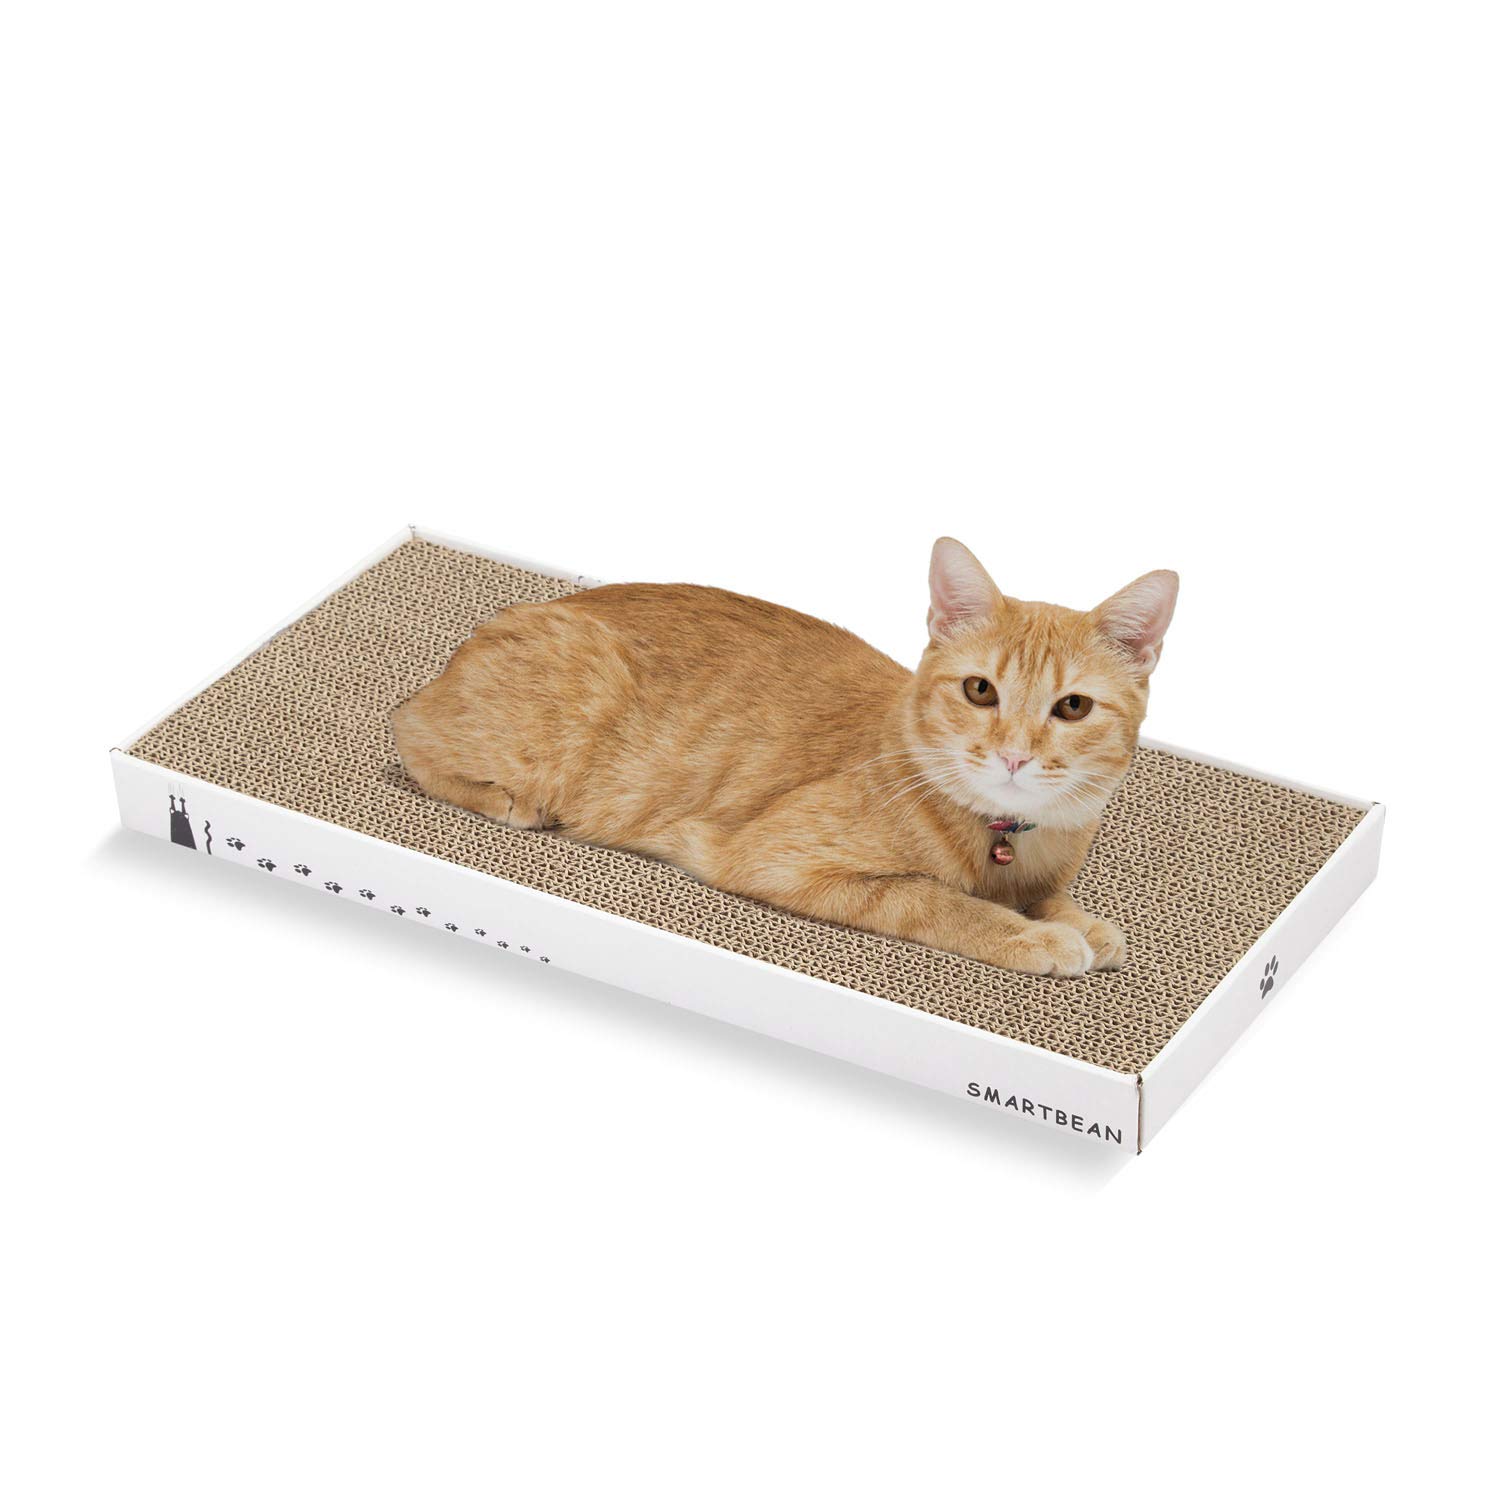 Cardboard Scratcher Pad Scratching Post:Smartbean Cat Scratch Pad,Cat  Scratching Post with Durable&High Density Cardboard, Indoor Toy for Cat,  Double-Sided Design for Double Life Scratch Pad - 1 pc